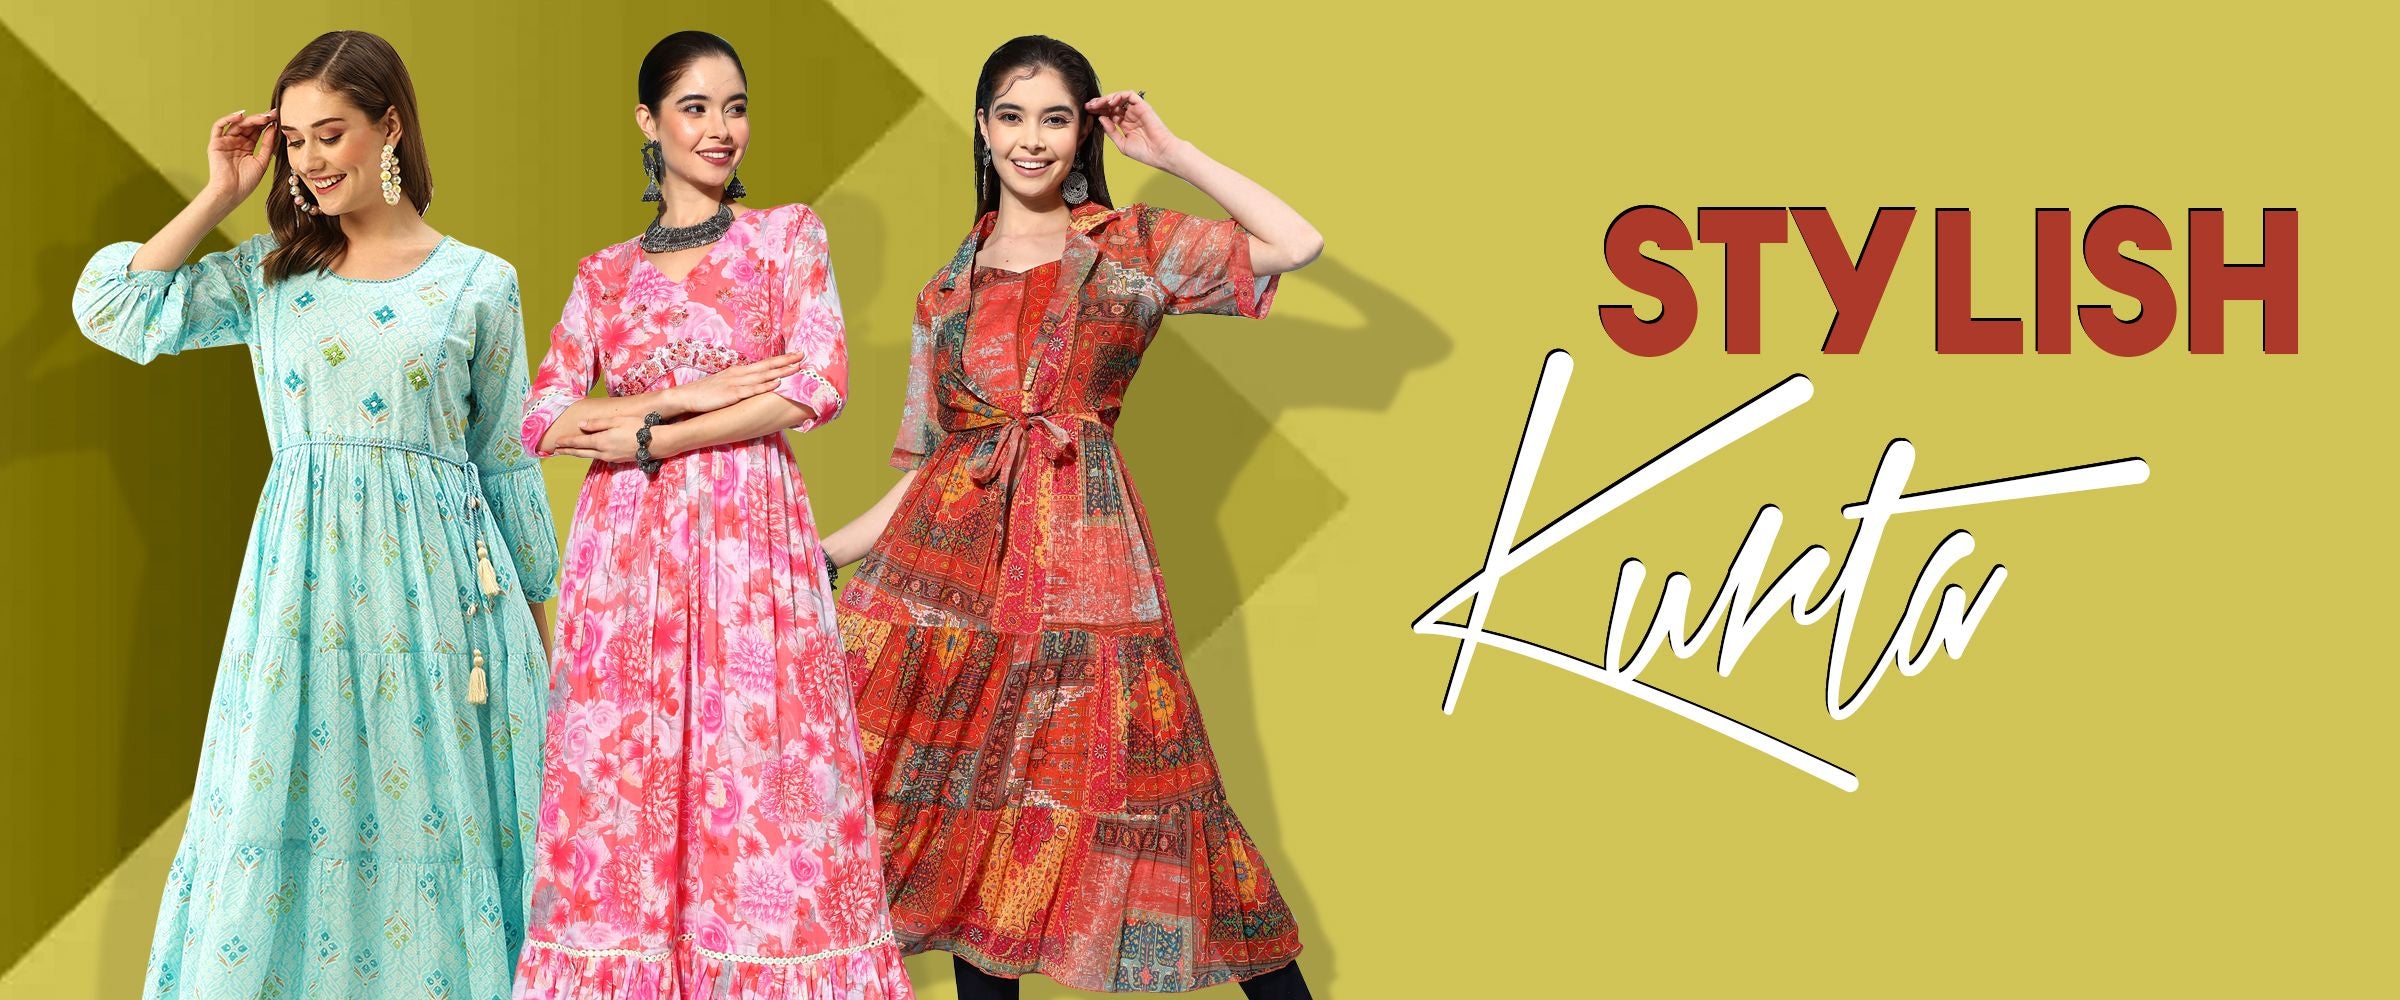 Elegance Redefined: Designer Kurtis & How to style them for Every Occasion